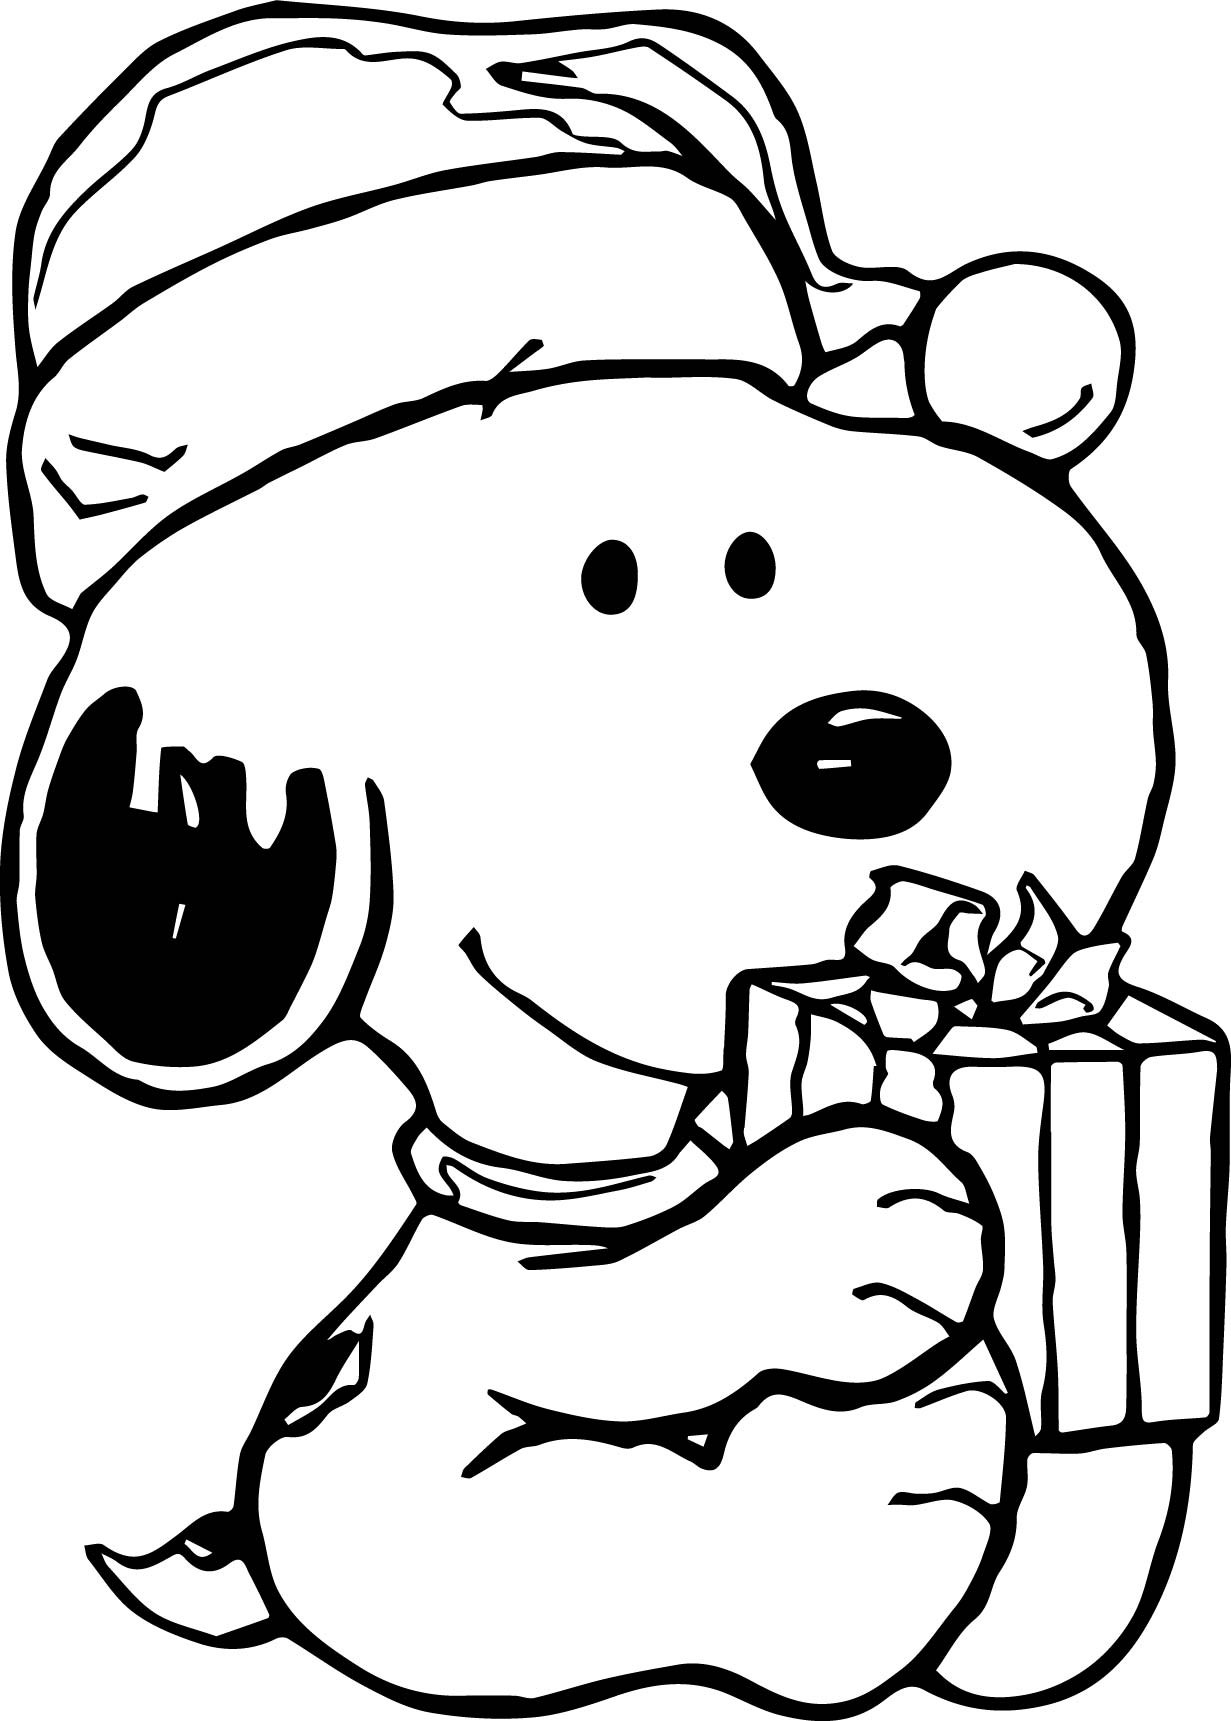 Snoppy Coloring Pages
 Baby Snoopy Christmas Coloring Page